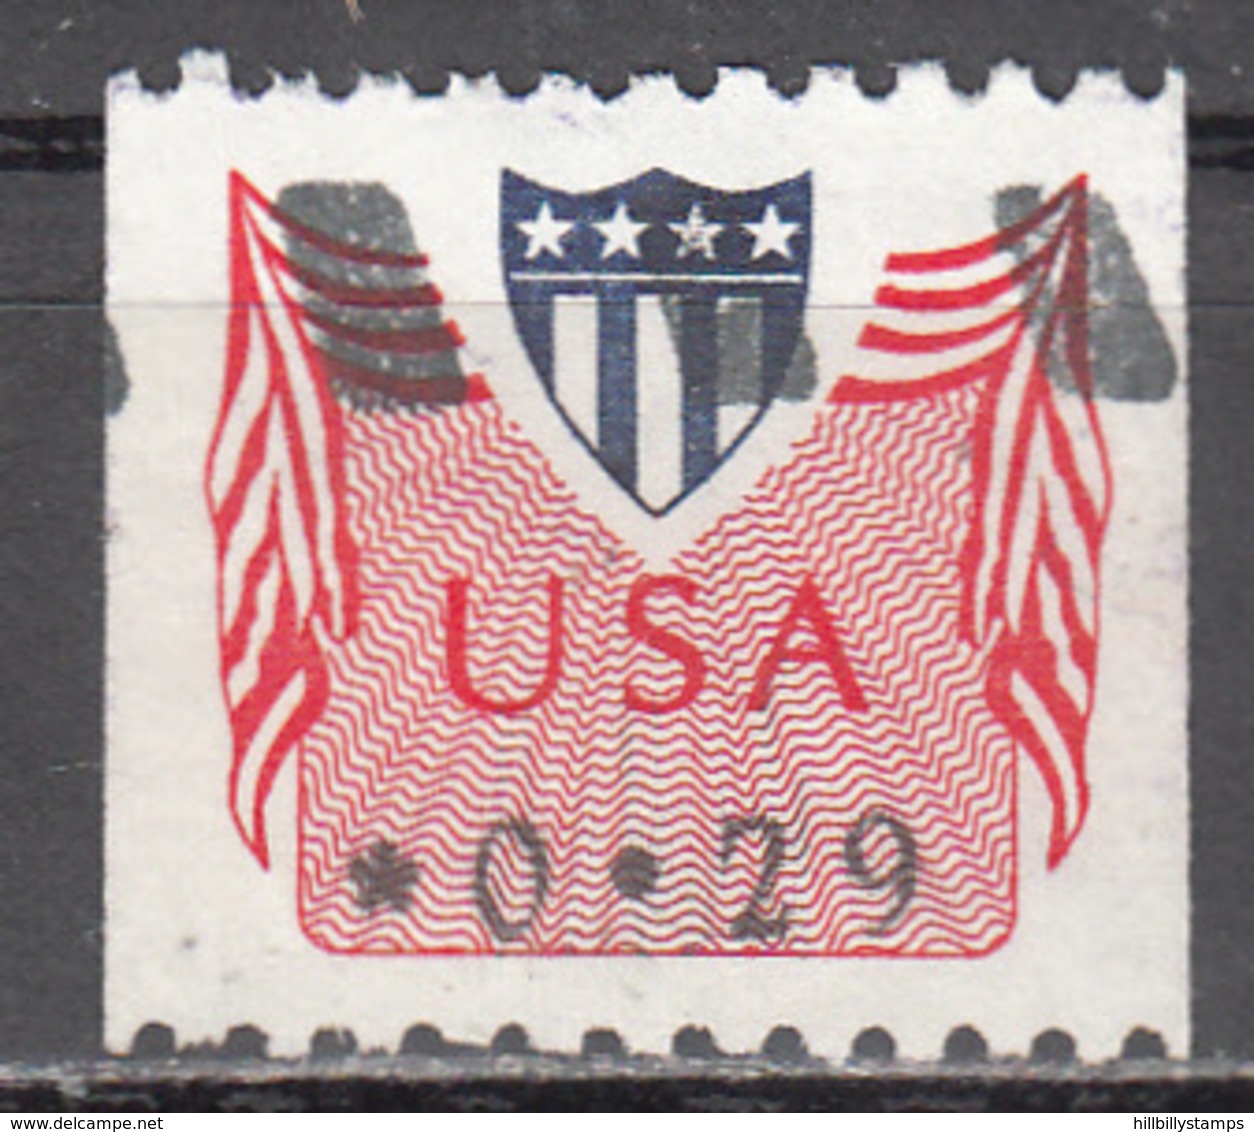 UNITED STATES     SCOTT NO.CVP31     USED    YEAR 1992 - Timbres De Distributeurs [ATM]